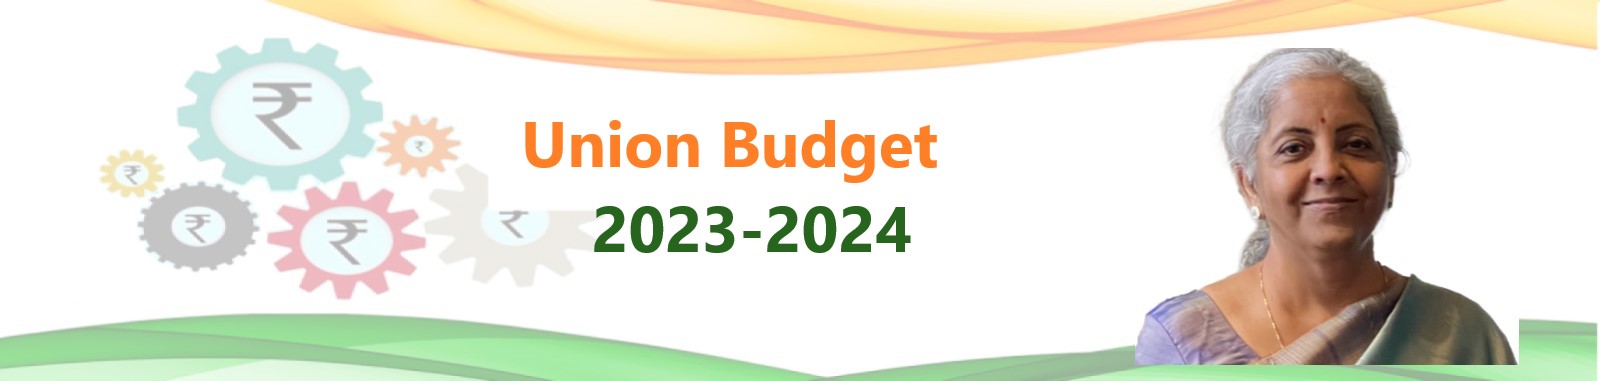 Union Budget 2023-2024 by Nirmala Sitharaman in Amrit Kaal